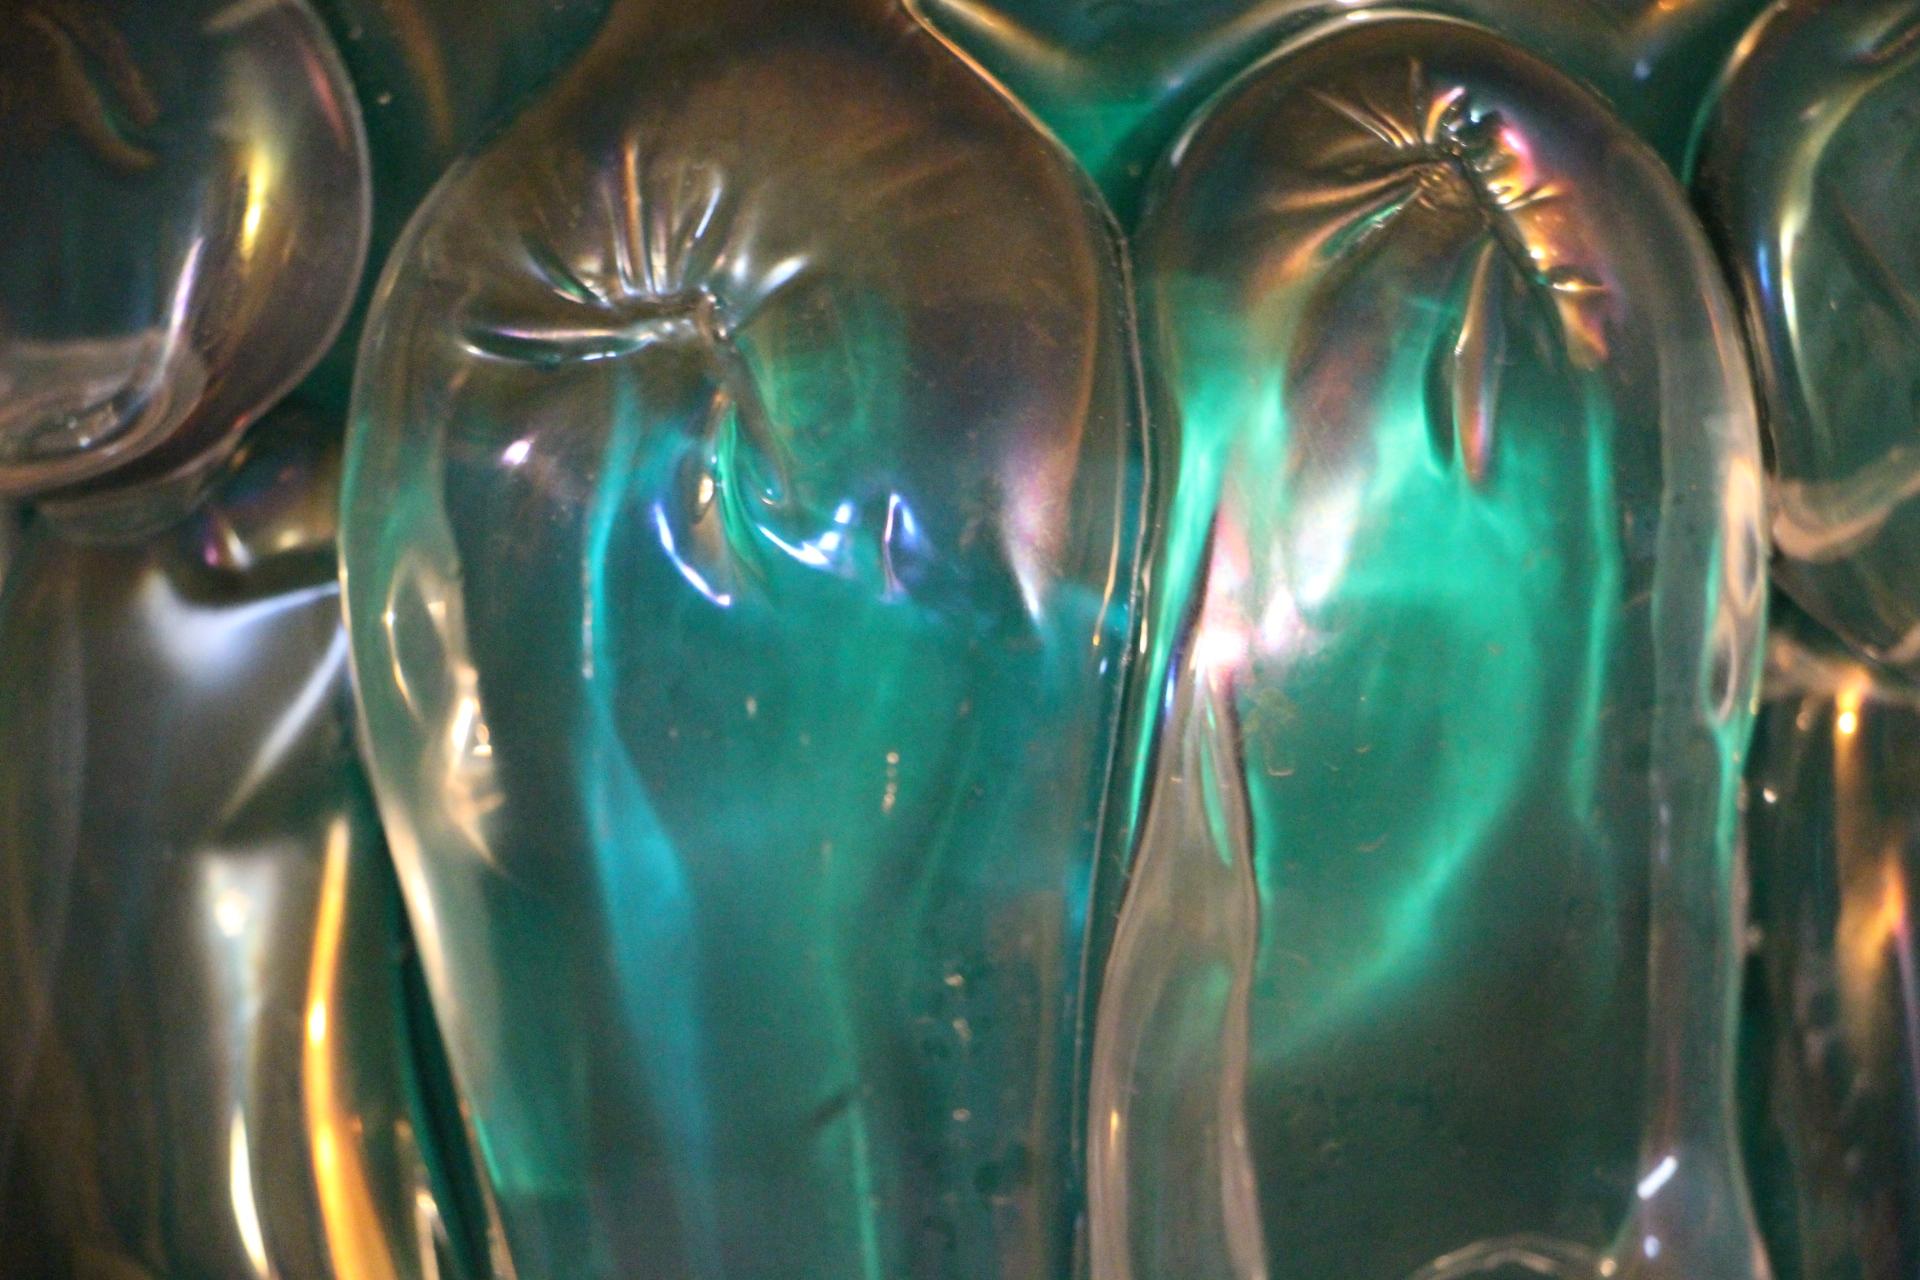 Pair of Large Emerald Green Color and Iridescent Murano Glass Vases by Cenedese 11